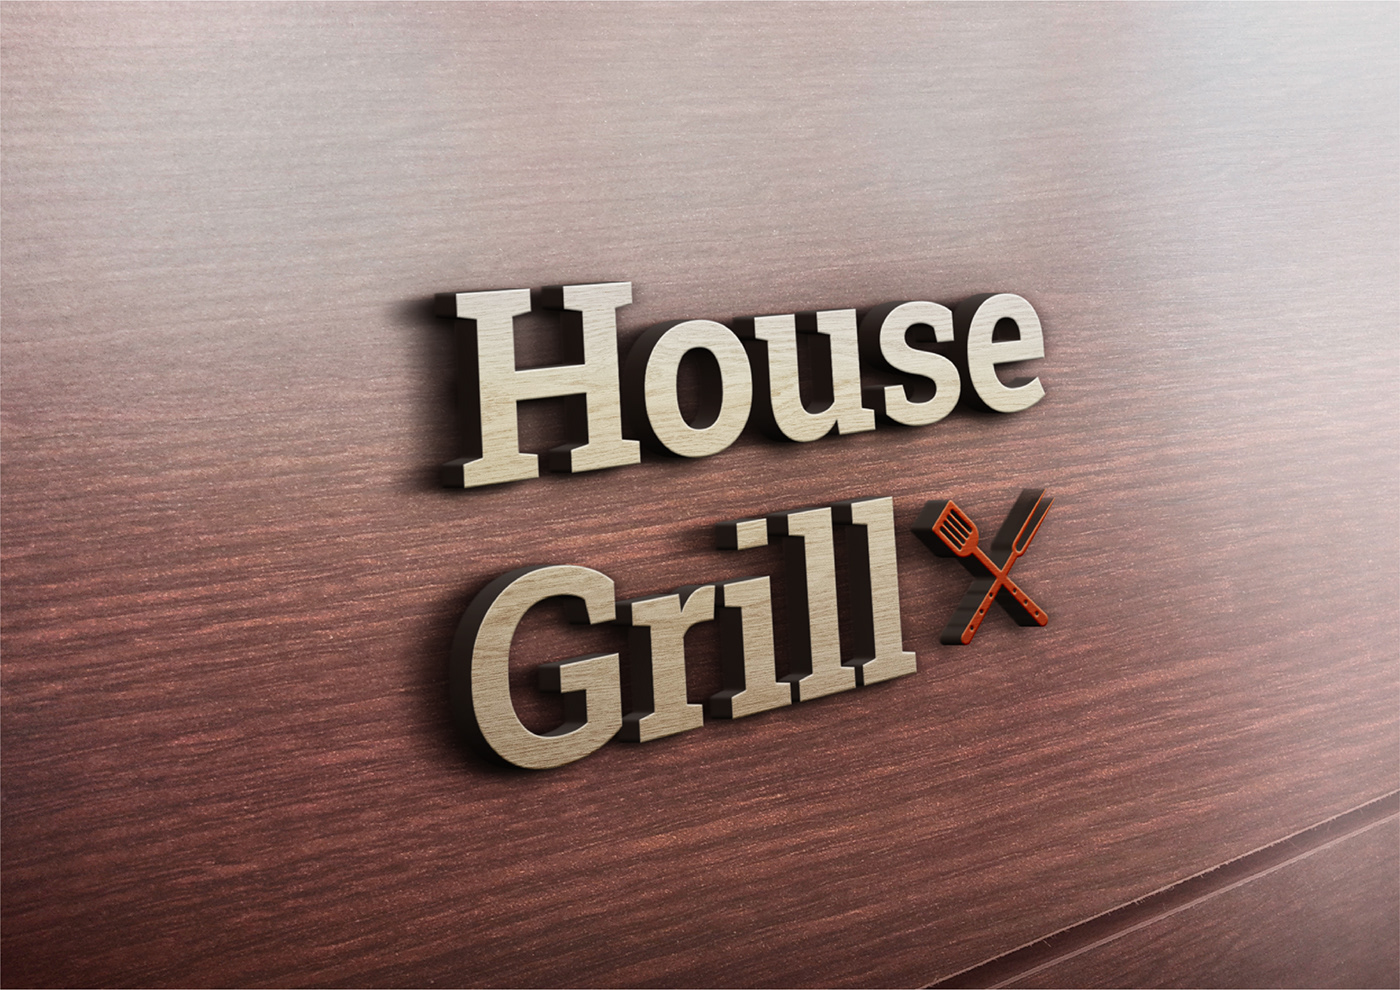 house grill family design proyecto Thinking Parrillas familia